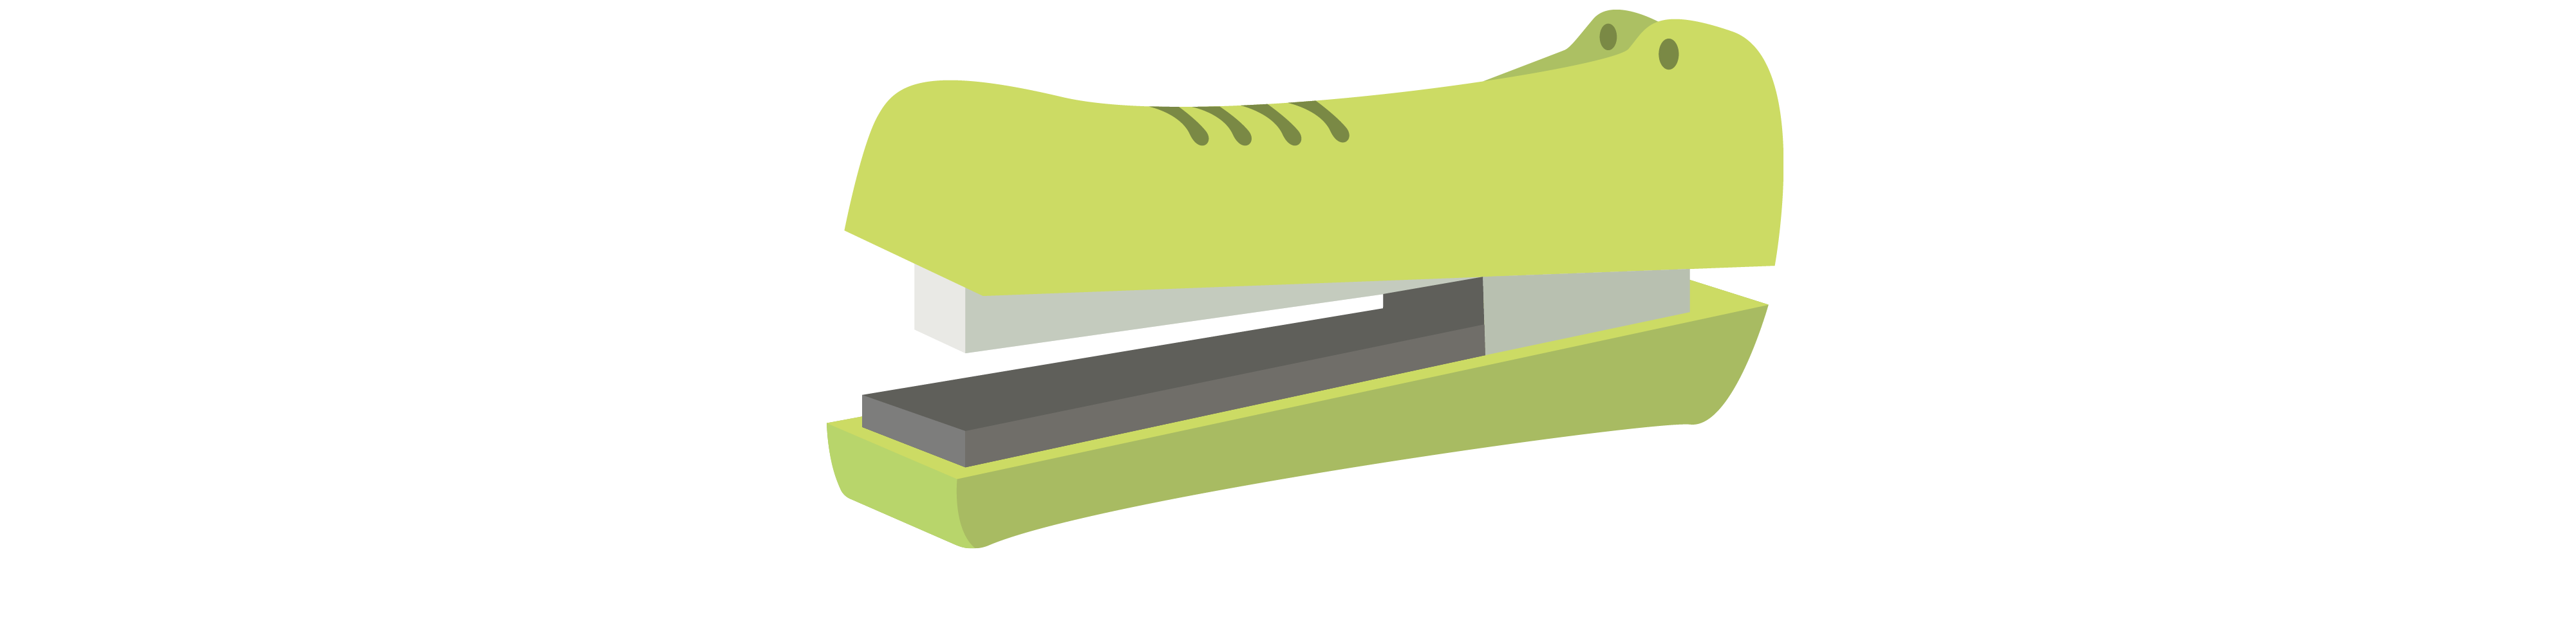 A stapler sits open, styled to anthropomorphize an alligator&#039;s mouth with the metallic stapling part resembling teeth, light green casing on the top and bottom and eyes at the back on the top.